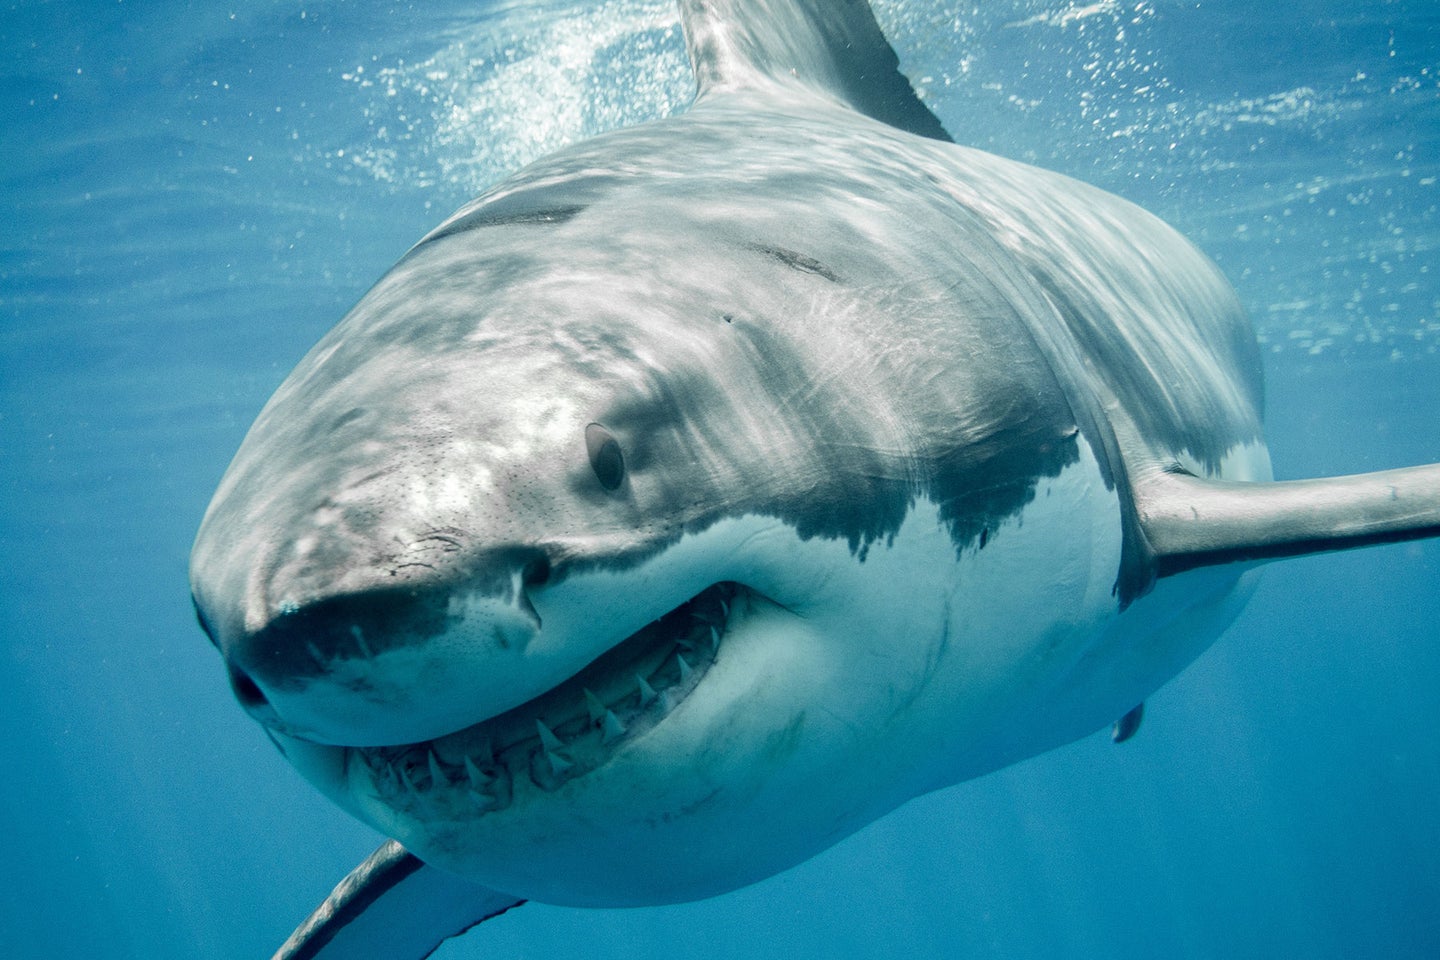 Researchers believe that Cape Cod may now have the world's highest concentration of Great White Sharks.